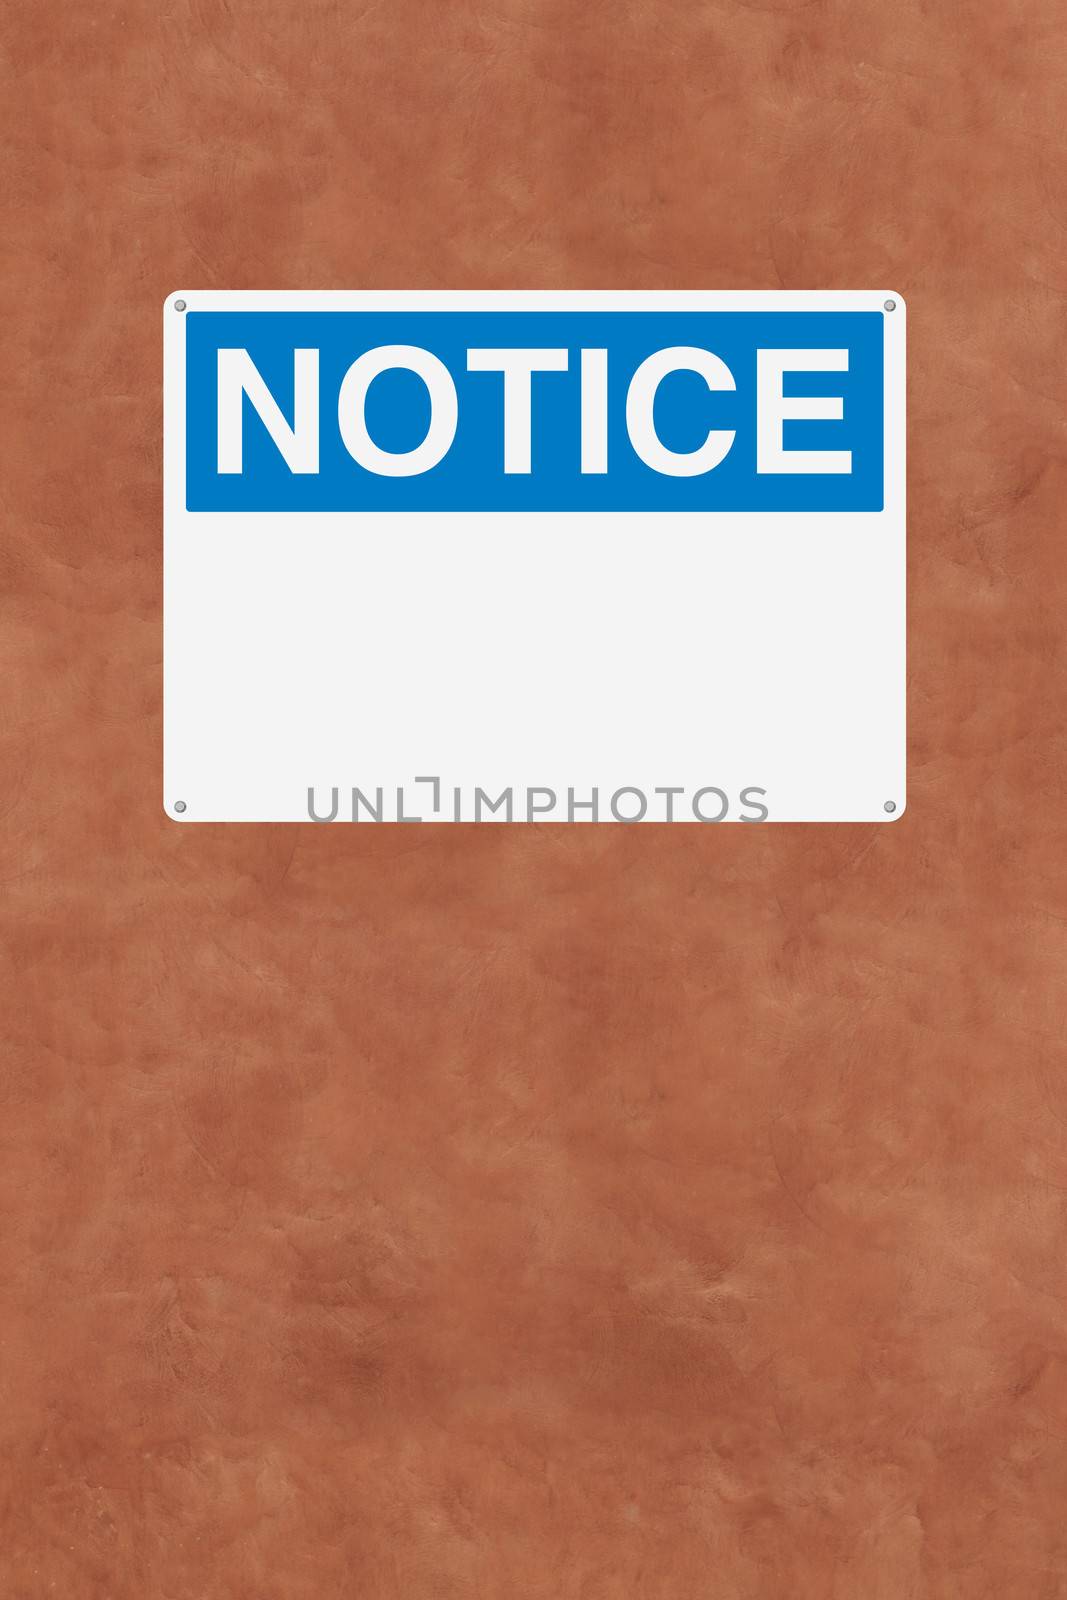 A blank notice sign mounted on a wall